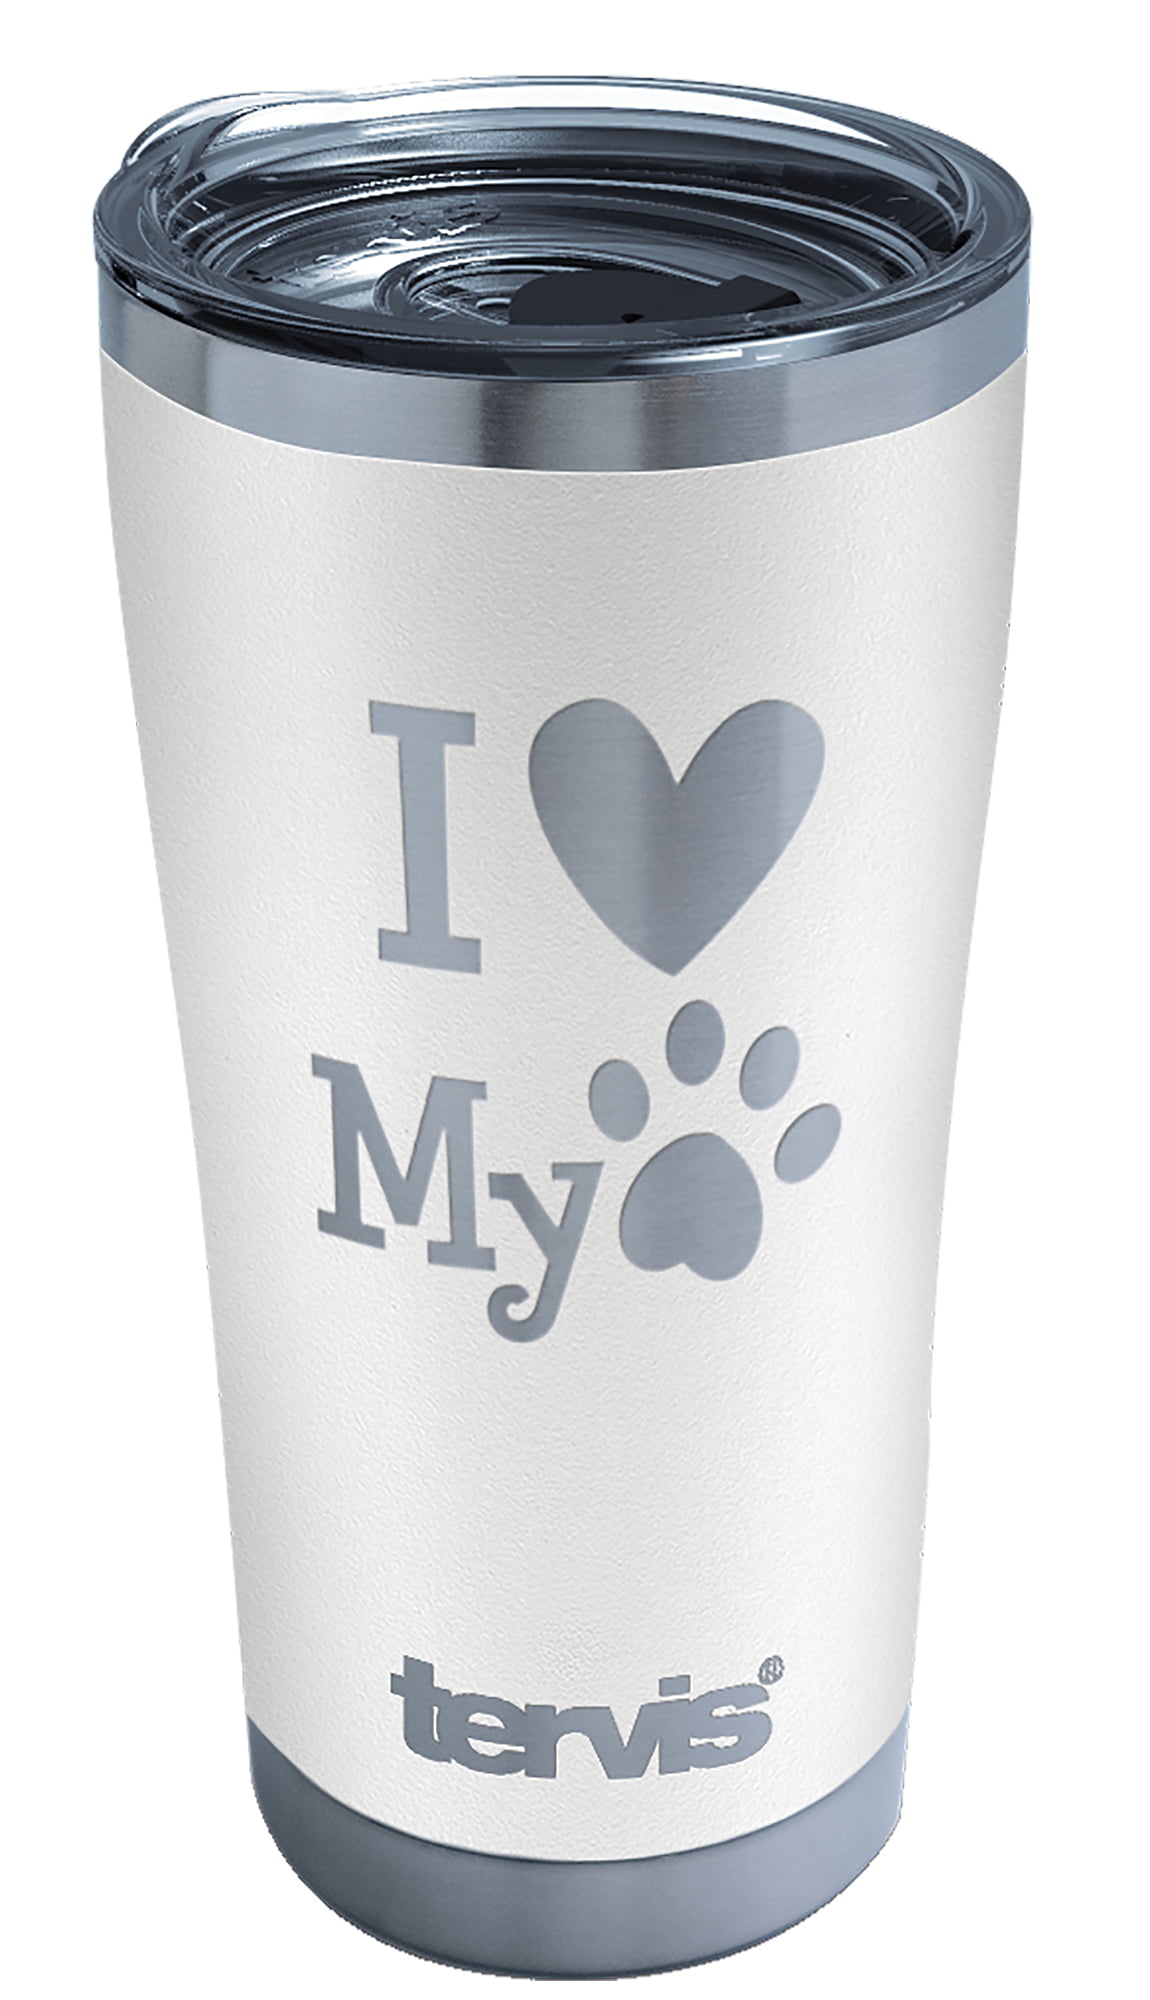 Tervis Triple Walled My Pet Glacier White Insulated Tumbler Cup Keeps  Drinks Cold & Hot, 30oz, Glacier White